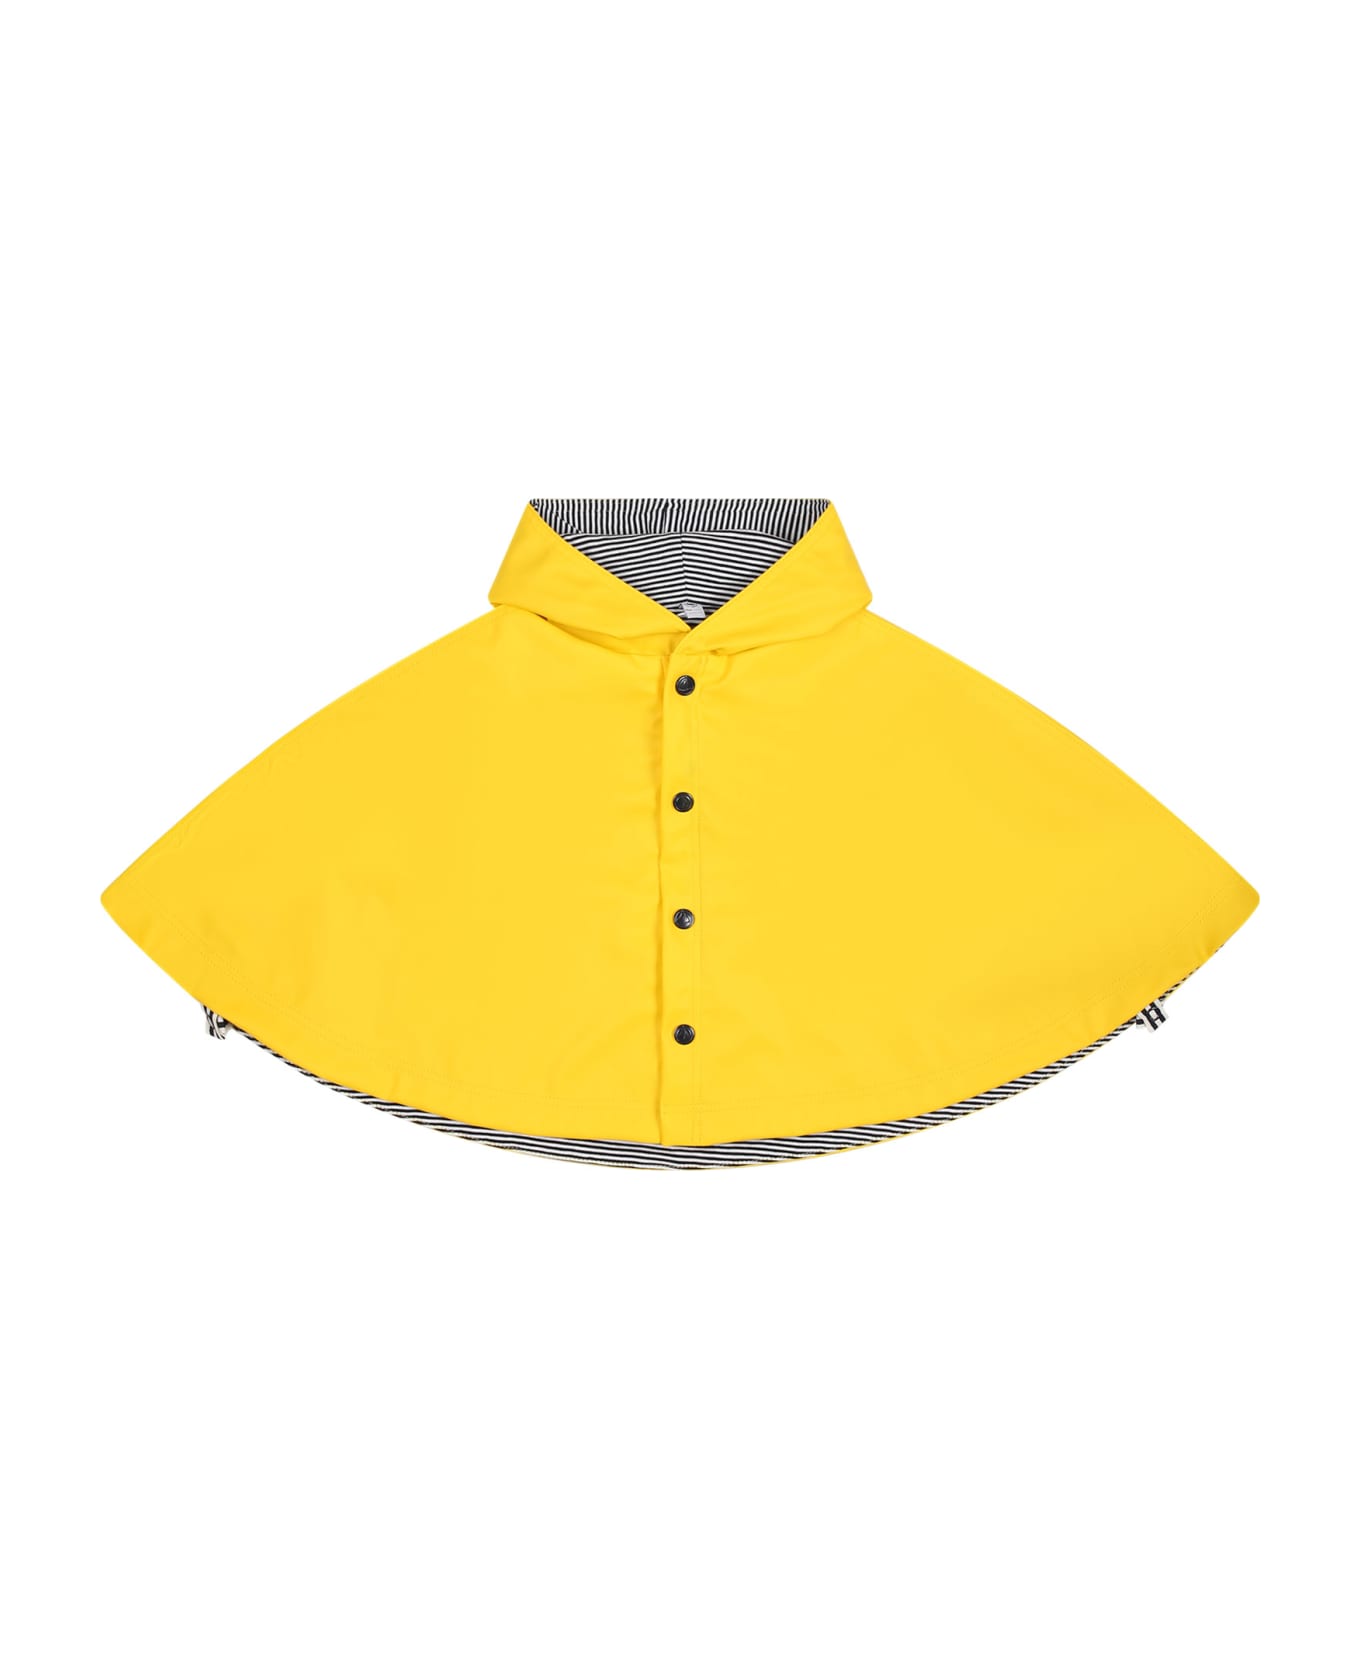 Petit Bateau Yellow Cape For Baby Kids - Yellow